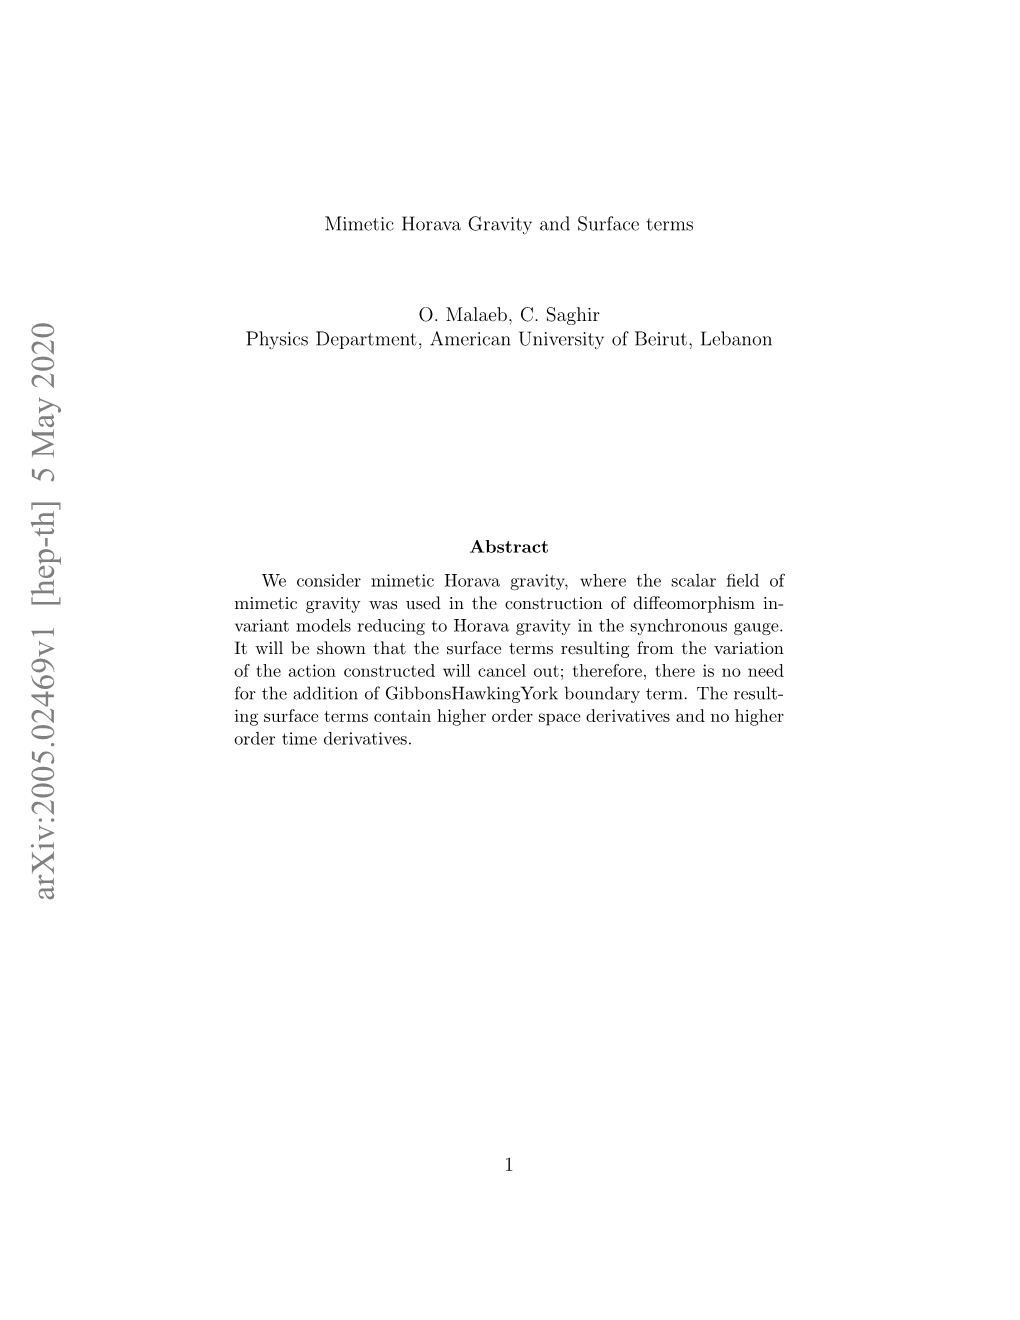 Mimetic Horava Gravity and Surface Terms